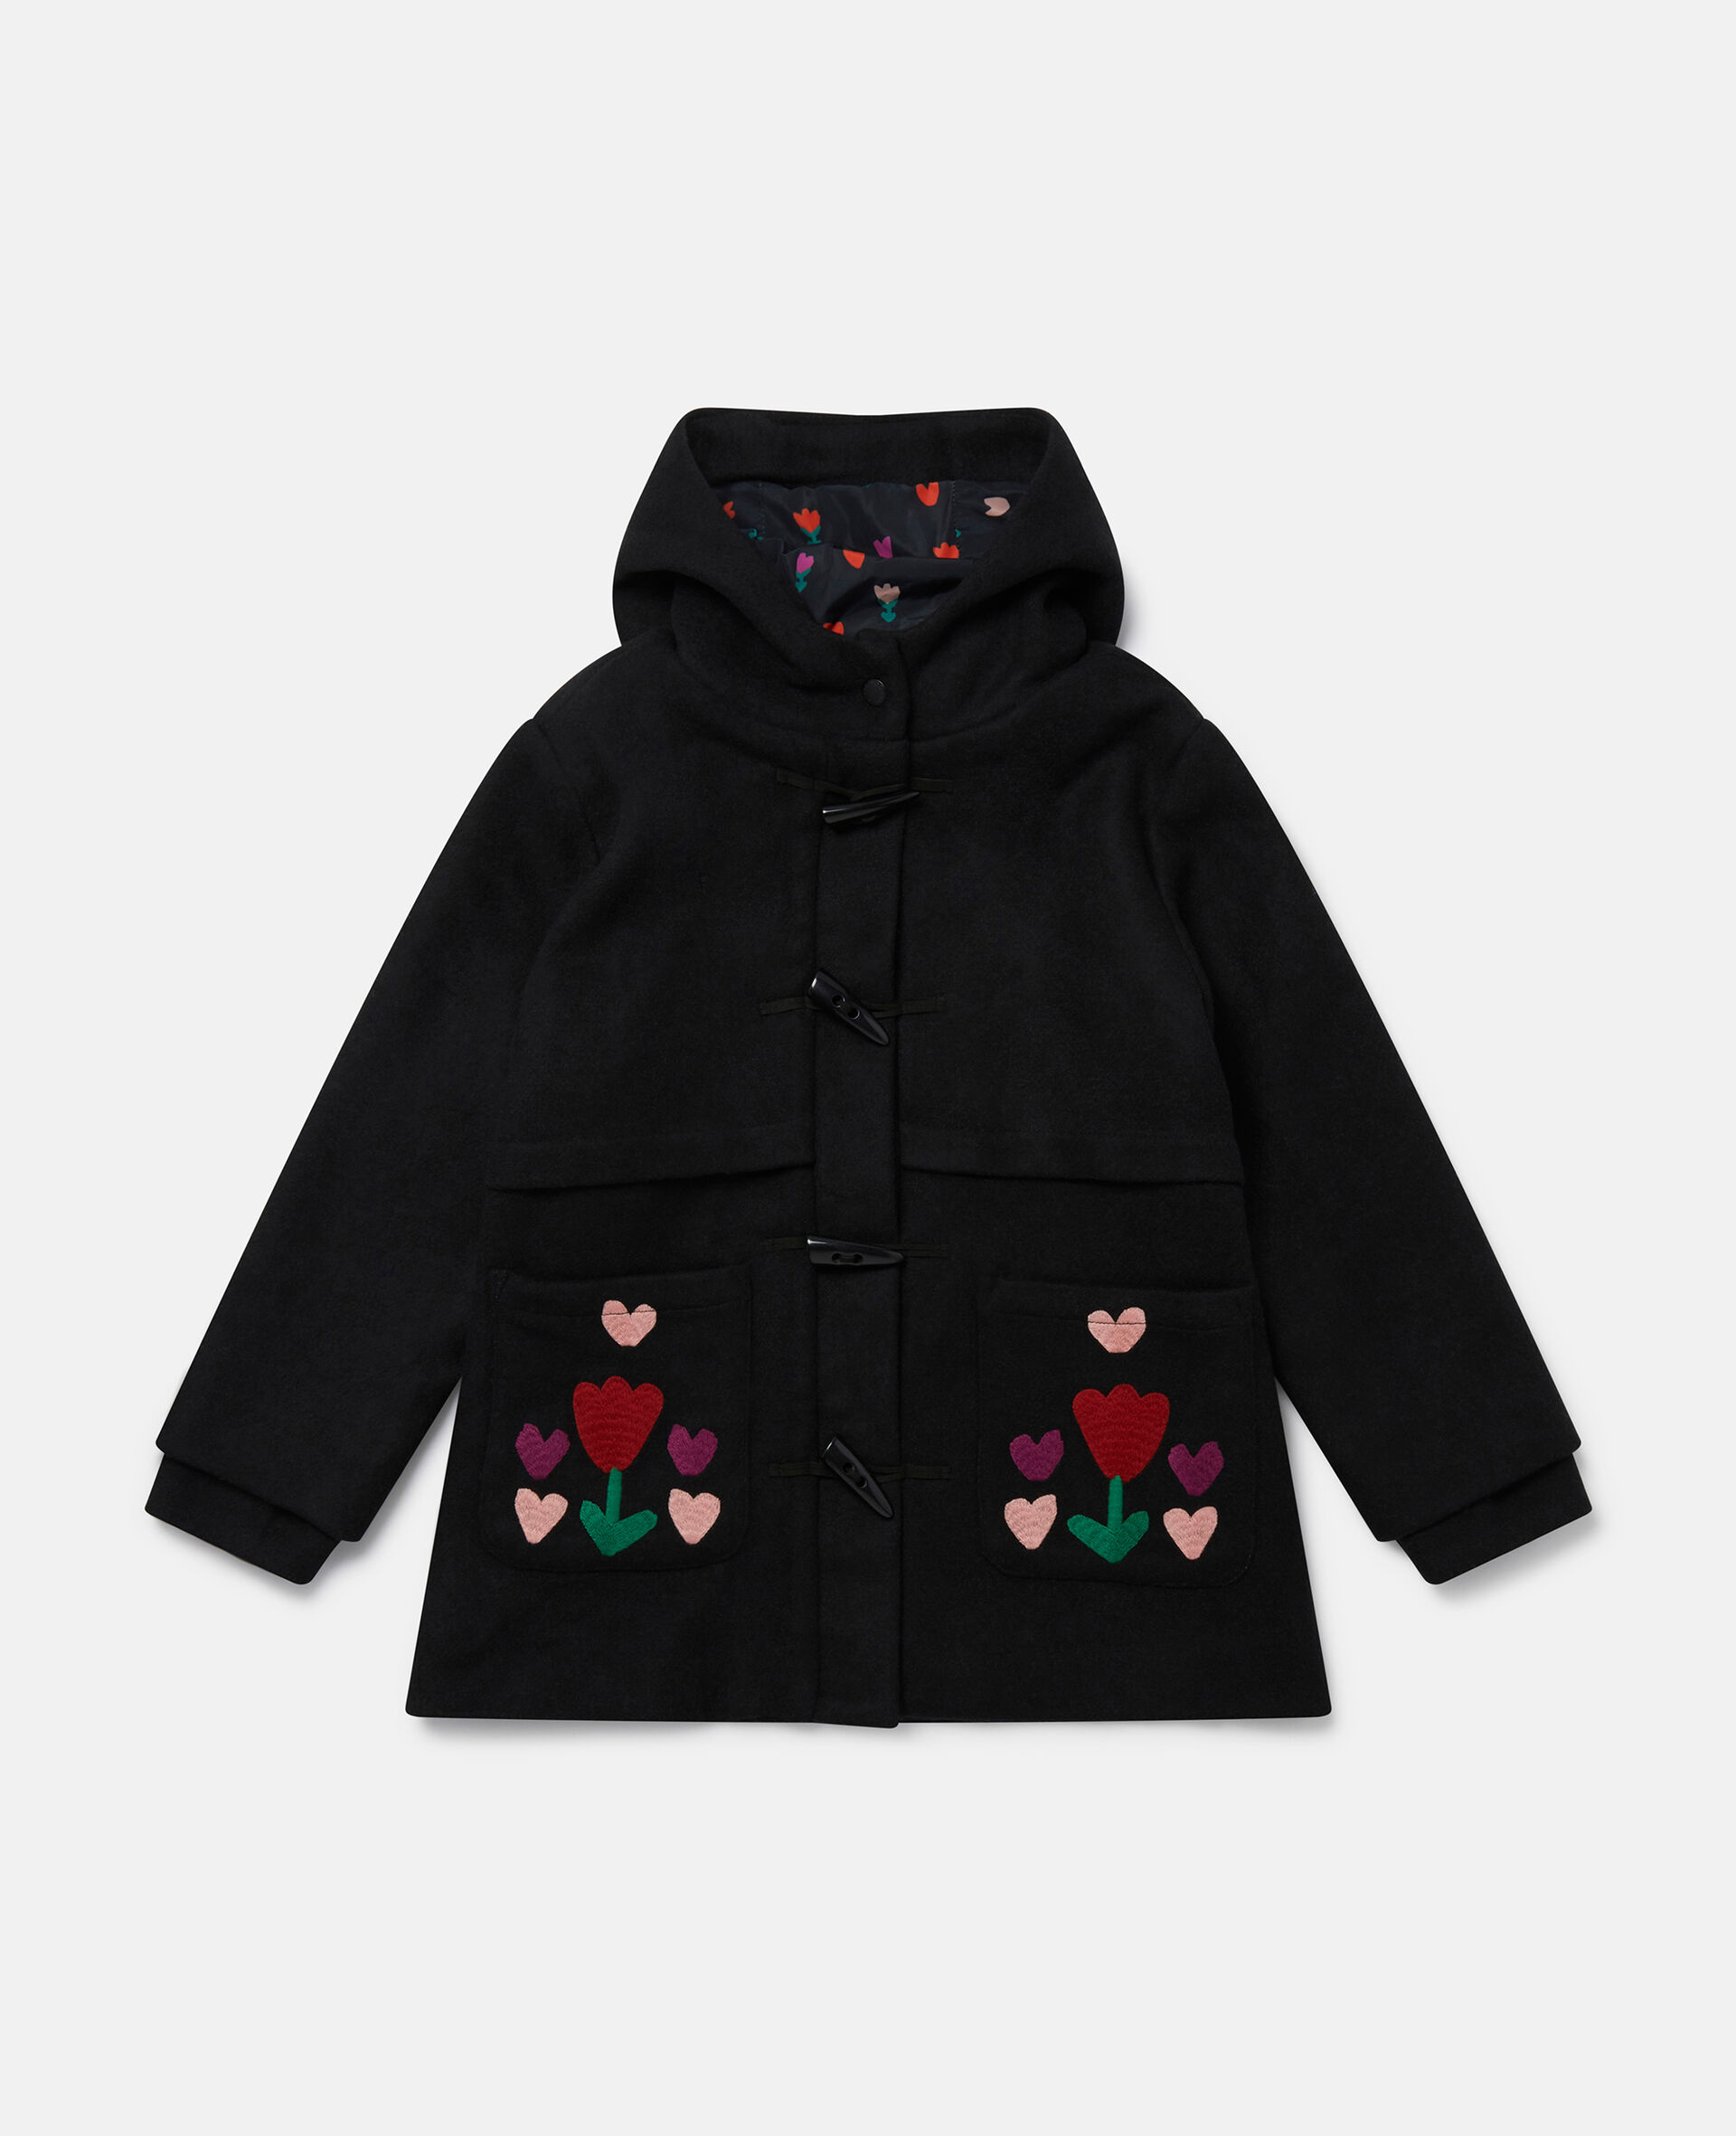 Tulip Embroidery Hooded Duffle Coat-Black-large image number 0